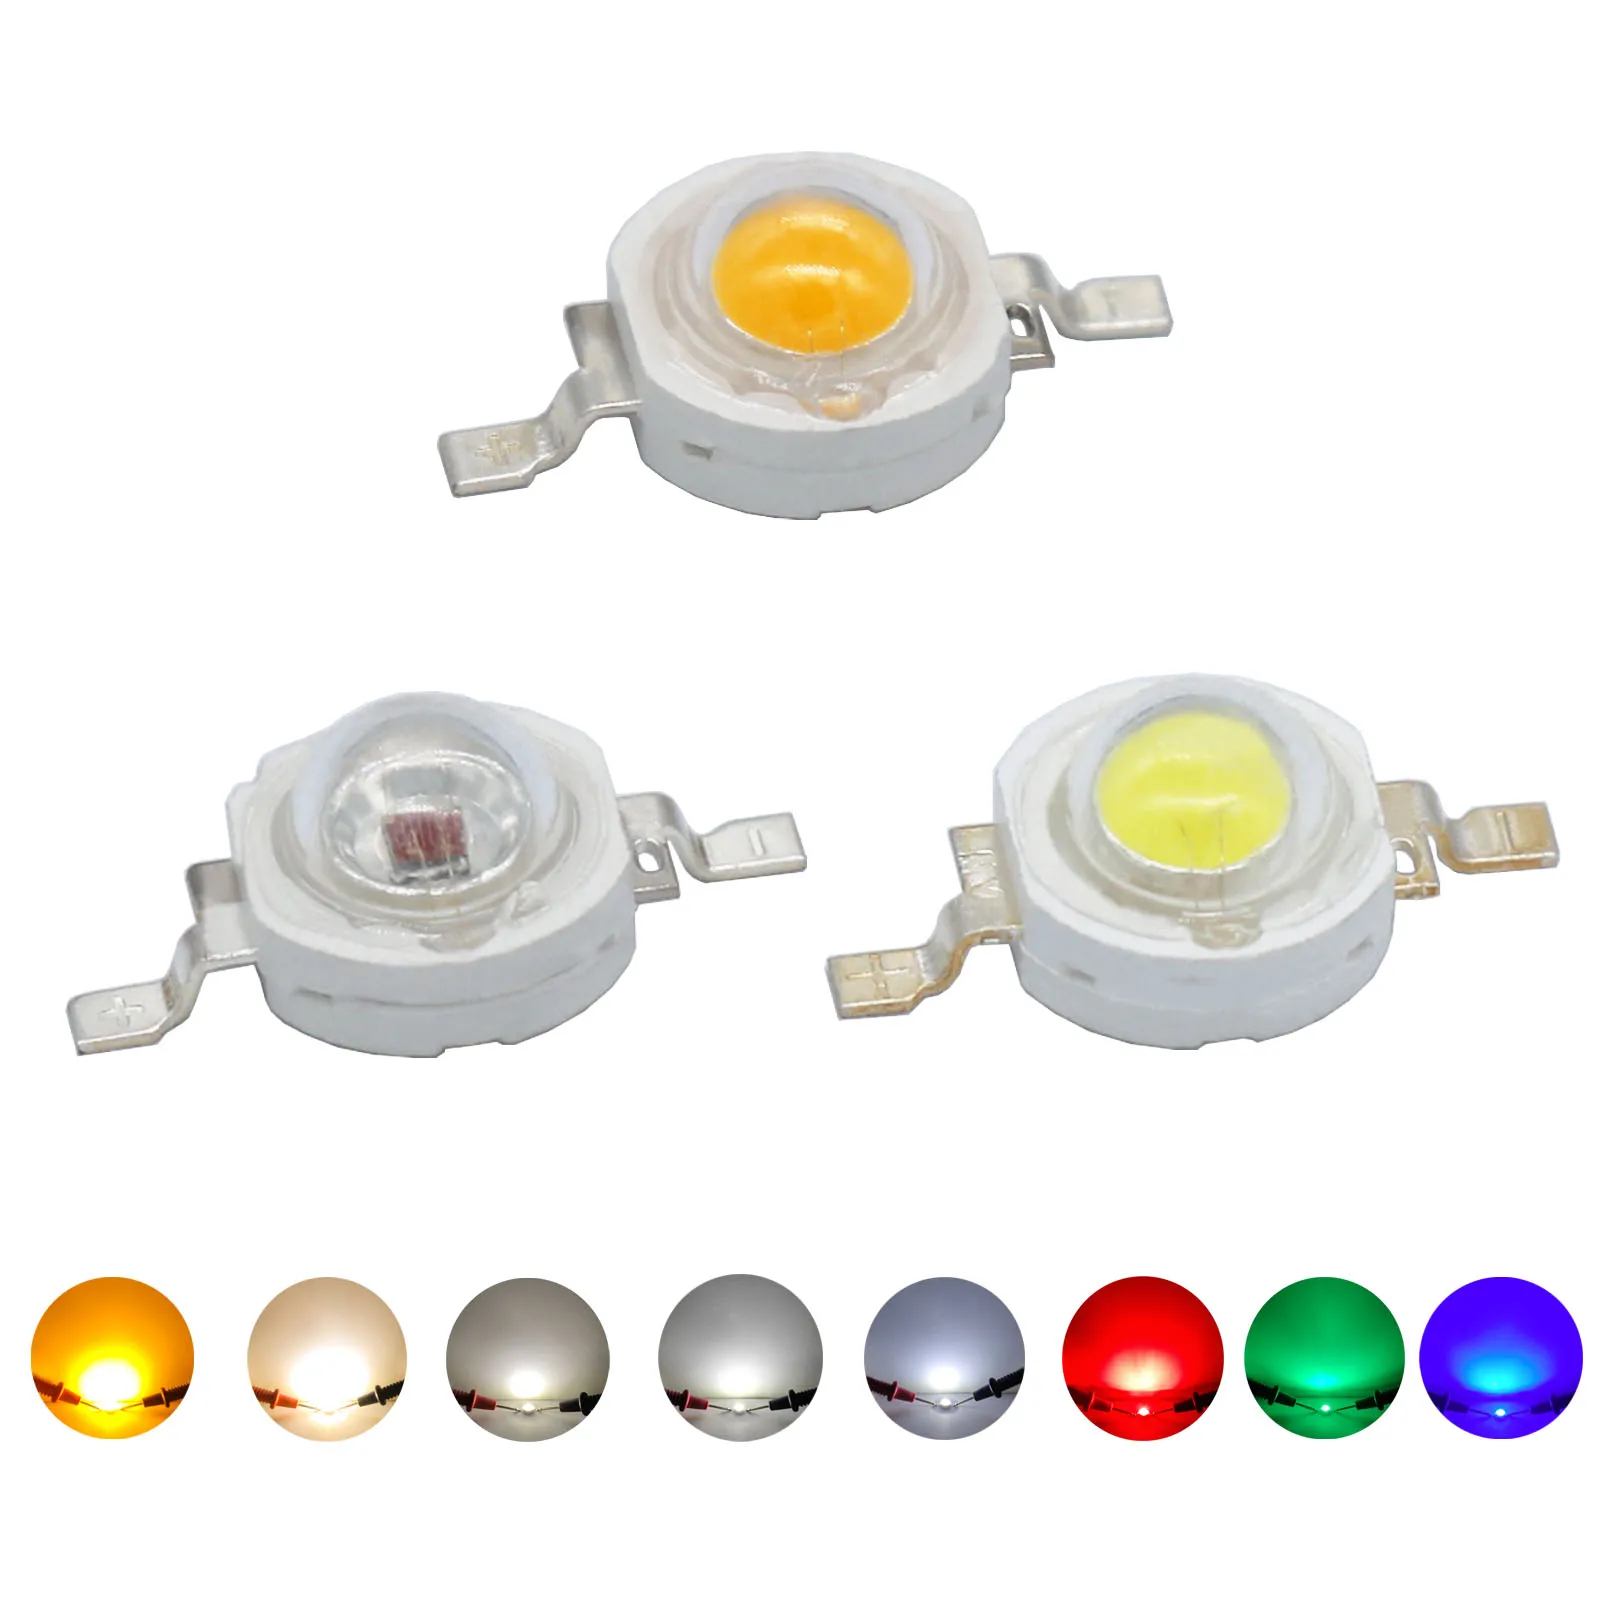 

100pcs 3W High Power LED Light-Emitting Diode LED Copper Chip Warm White Red Green Blue Yellow For SpotLight Downlight Lamp Bulb